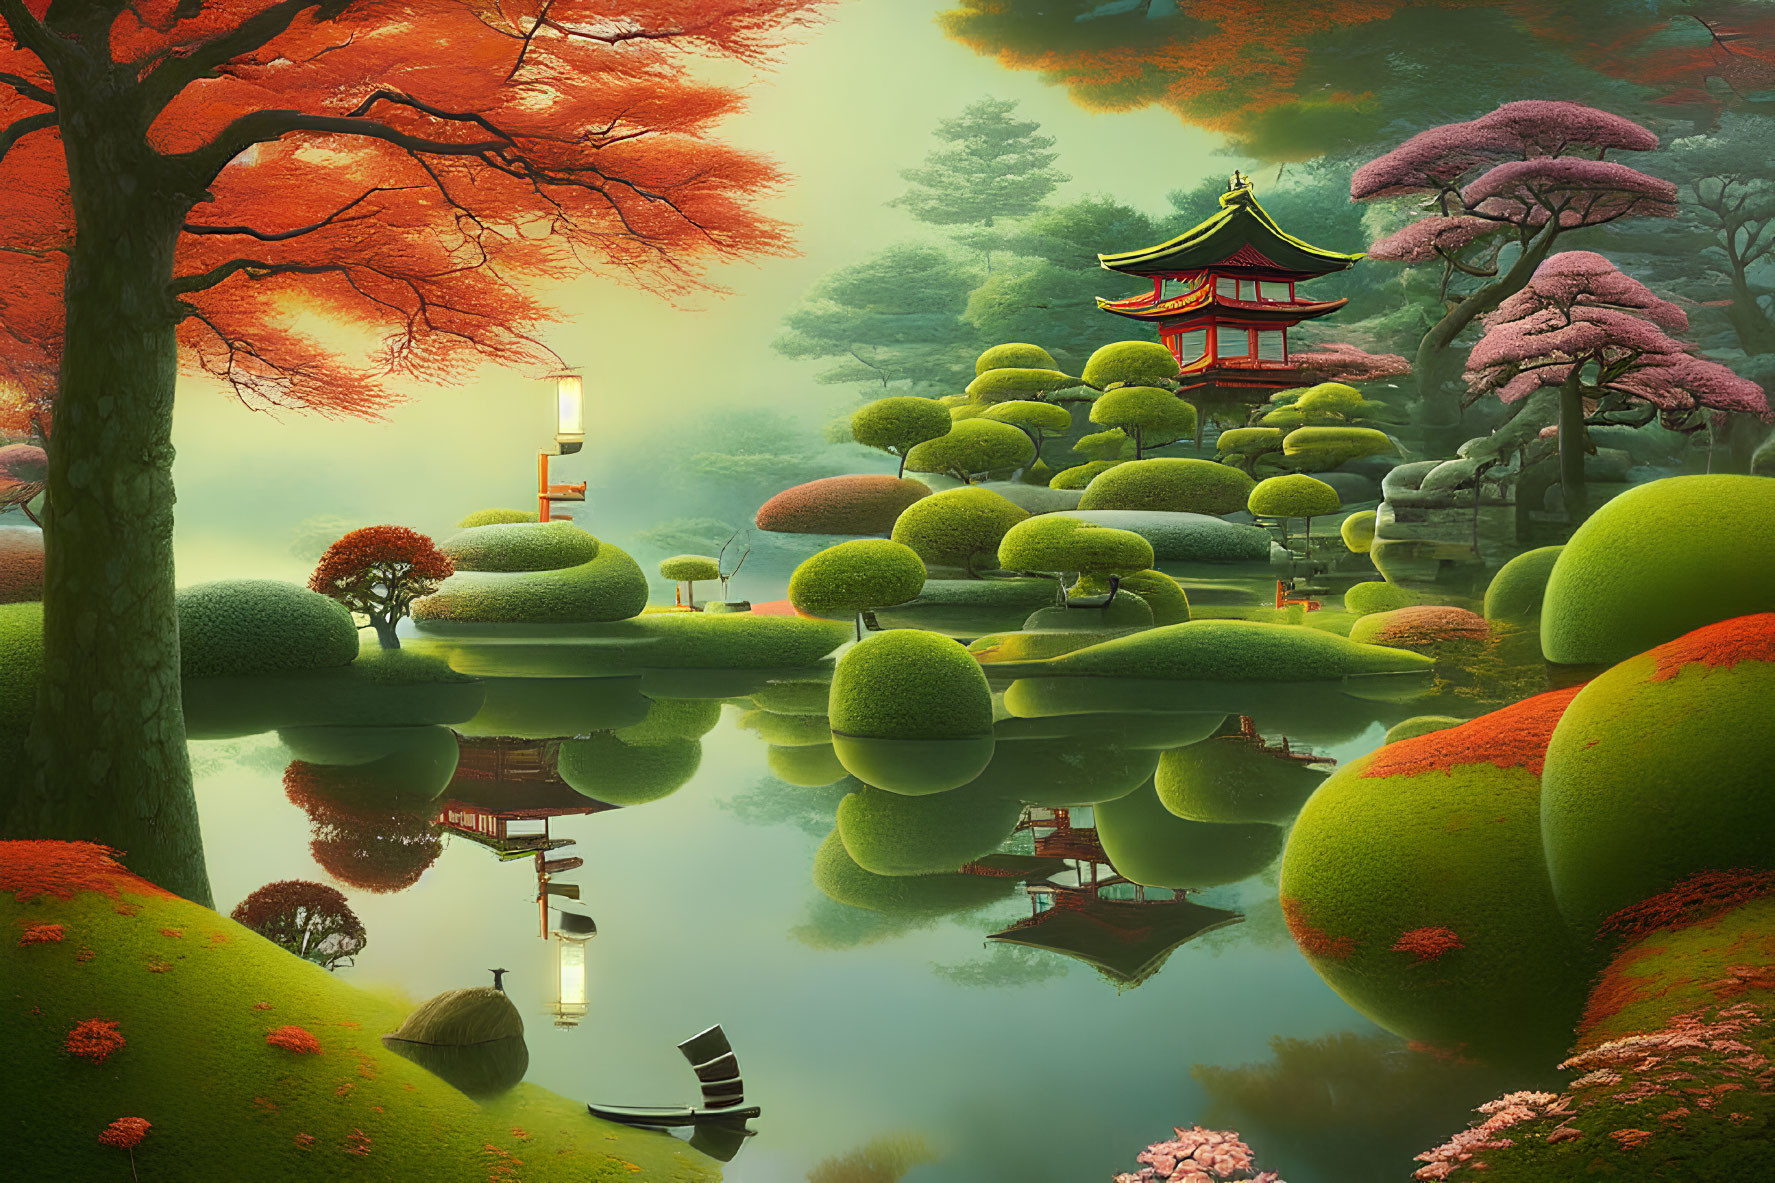 Tranquil Japanese garden with red pagoda, autumn trees, and serene pond